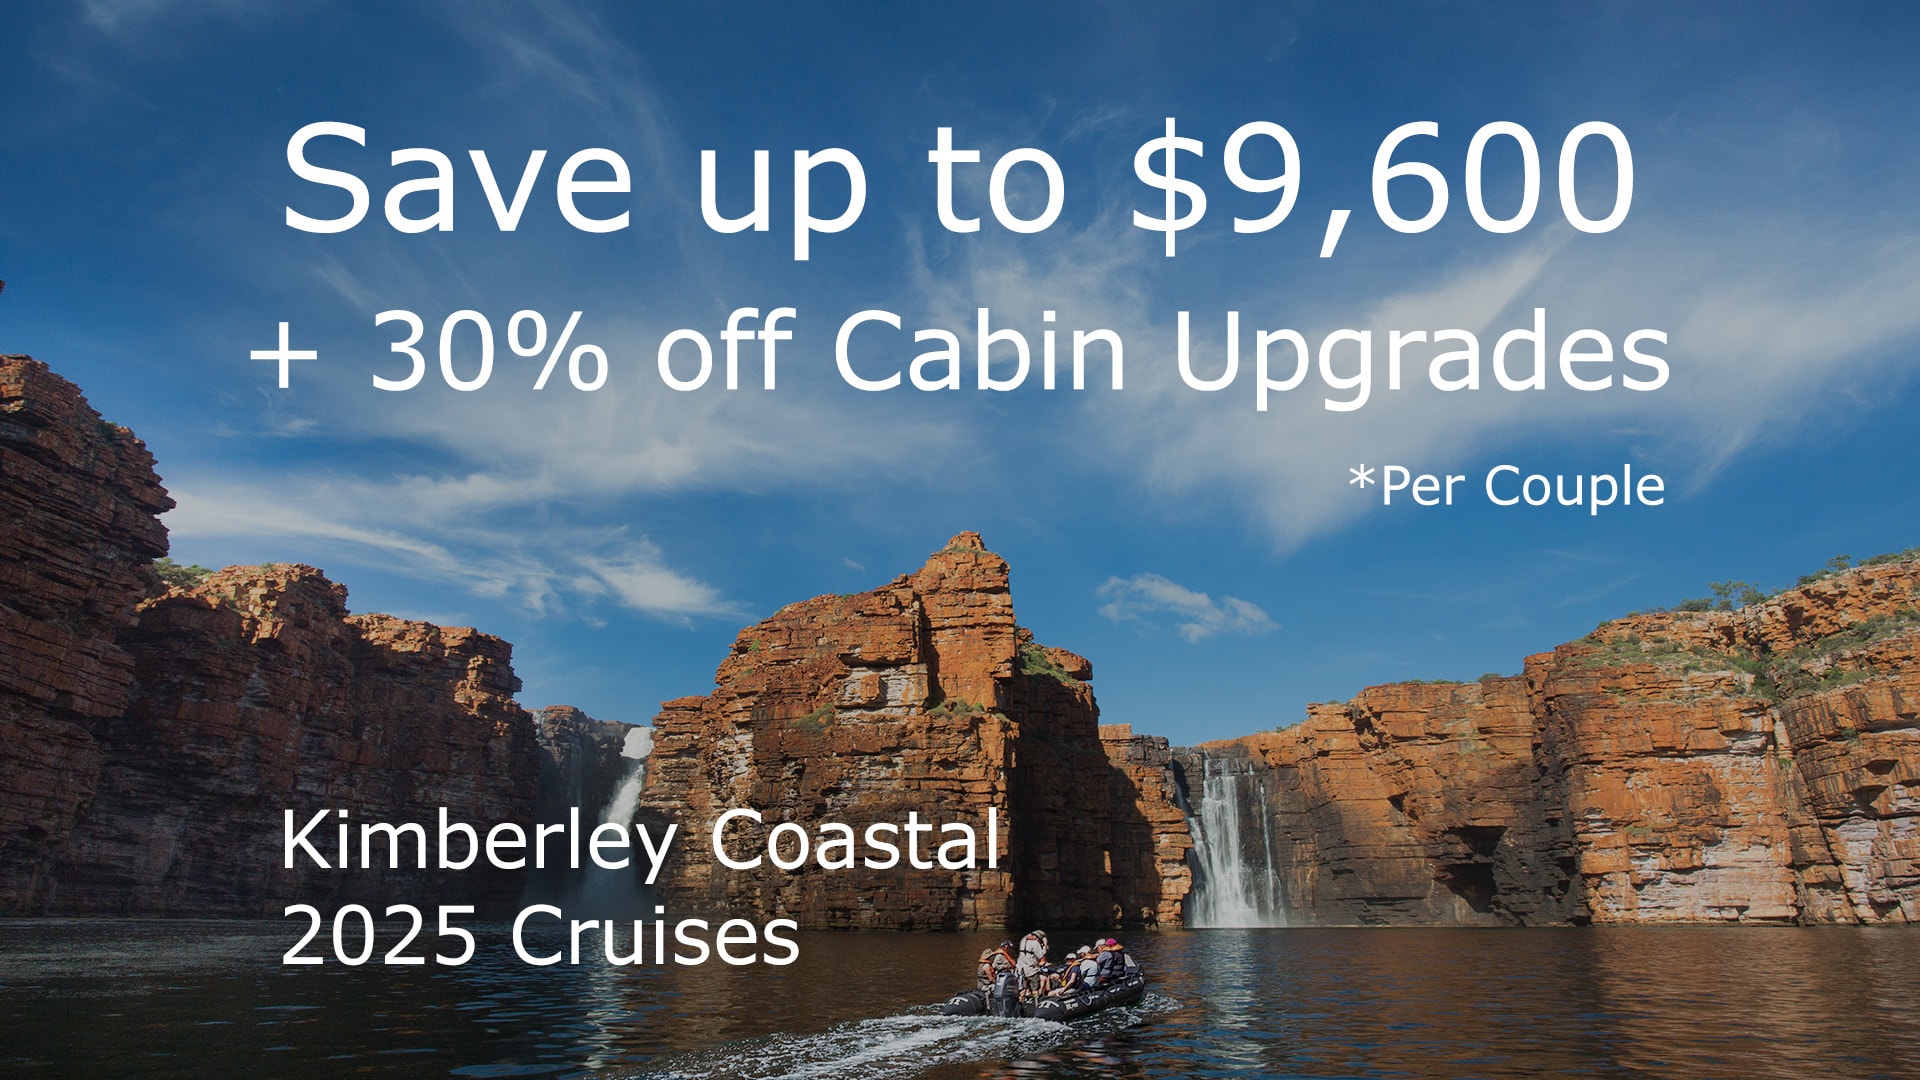 Save up to $9,600 + 30% off cabin upgrades